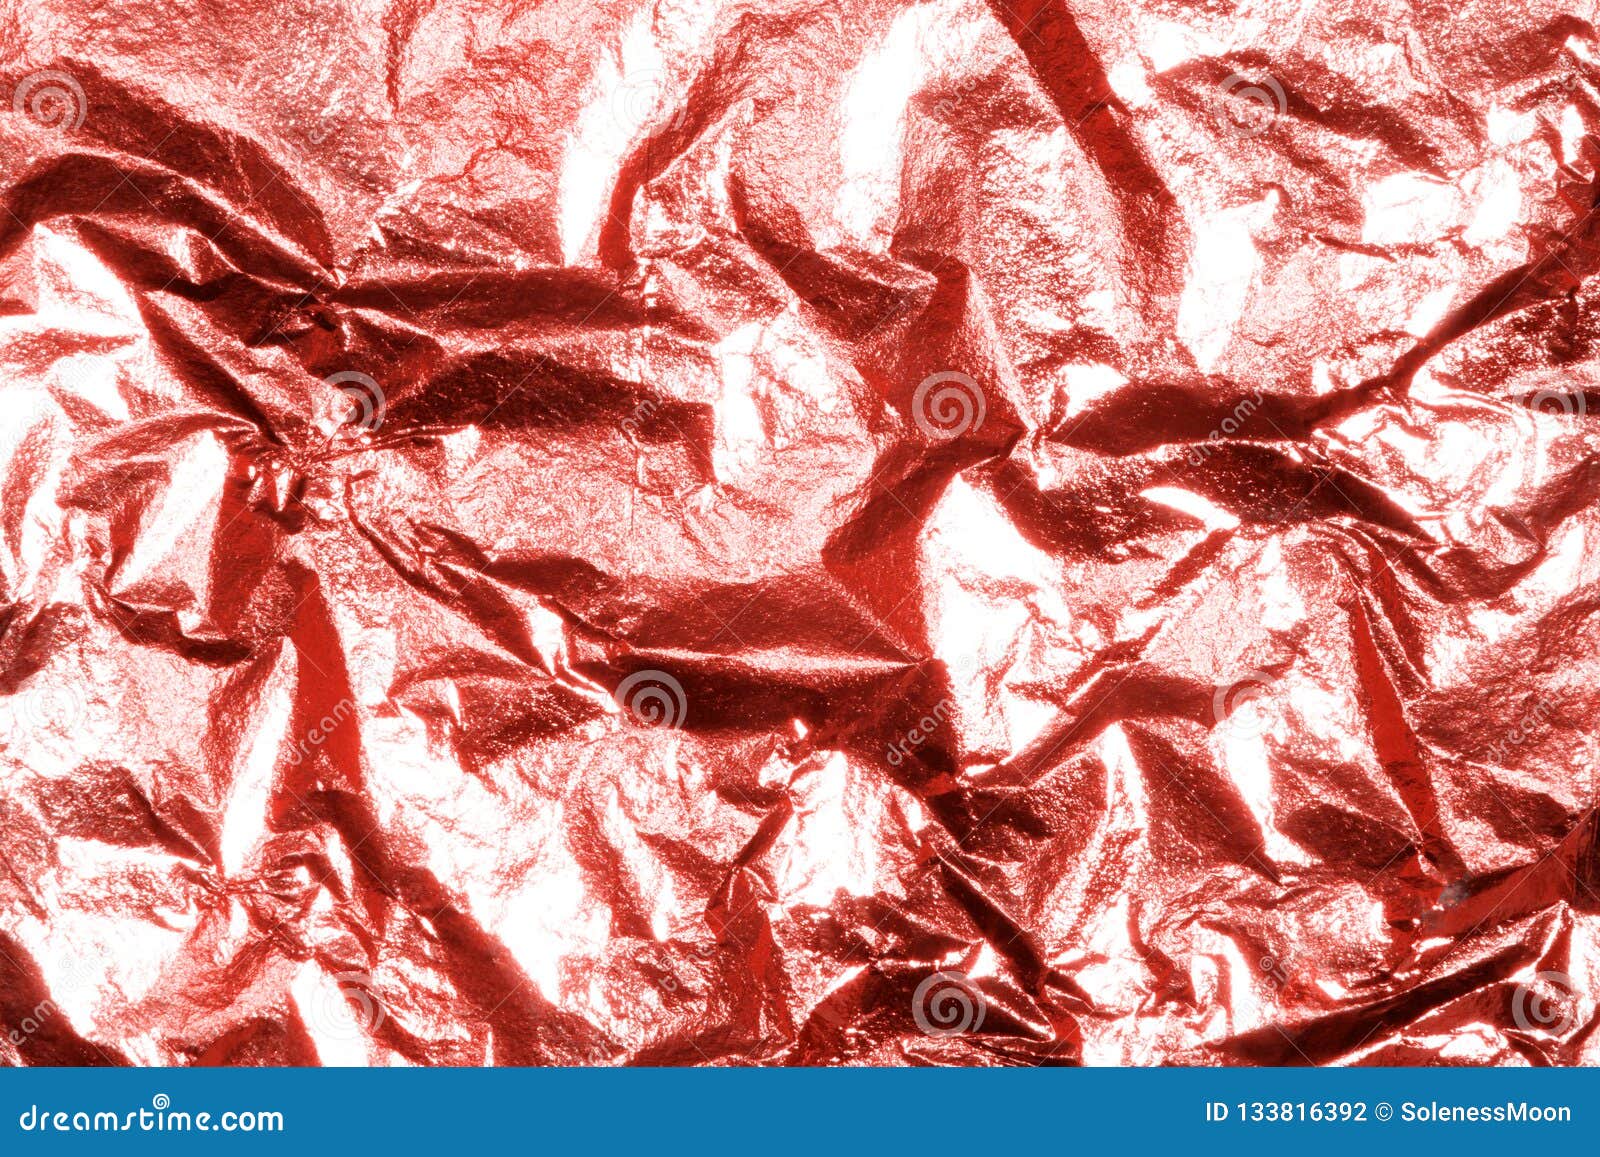 Gold Bright Shiny Texture Of A Crumpled Sheet. Stock Photo Image of backdrop, bright 133816392